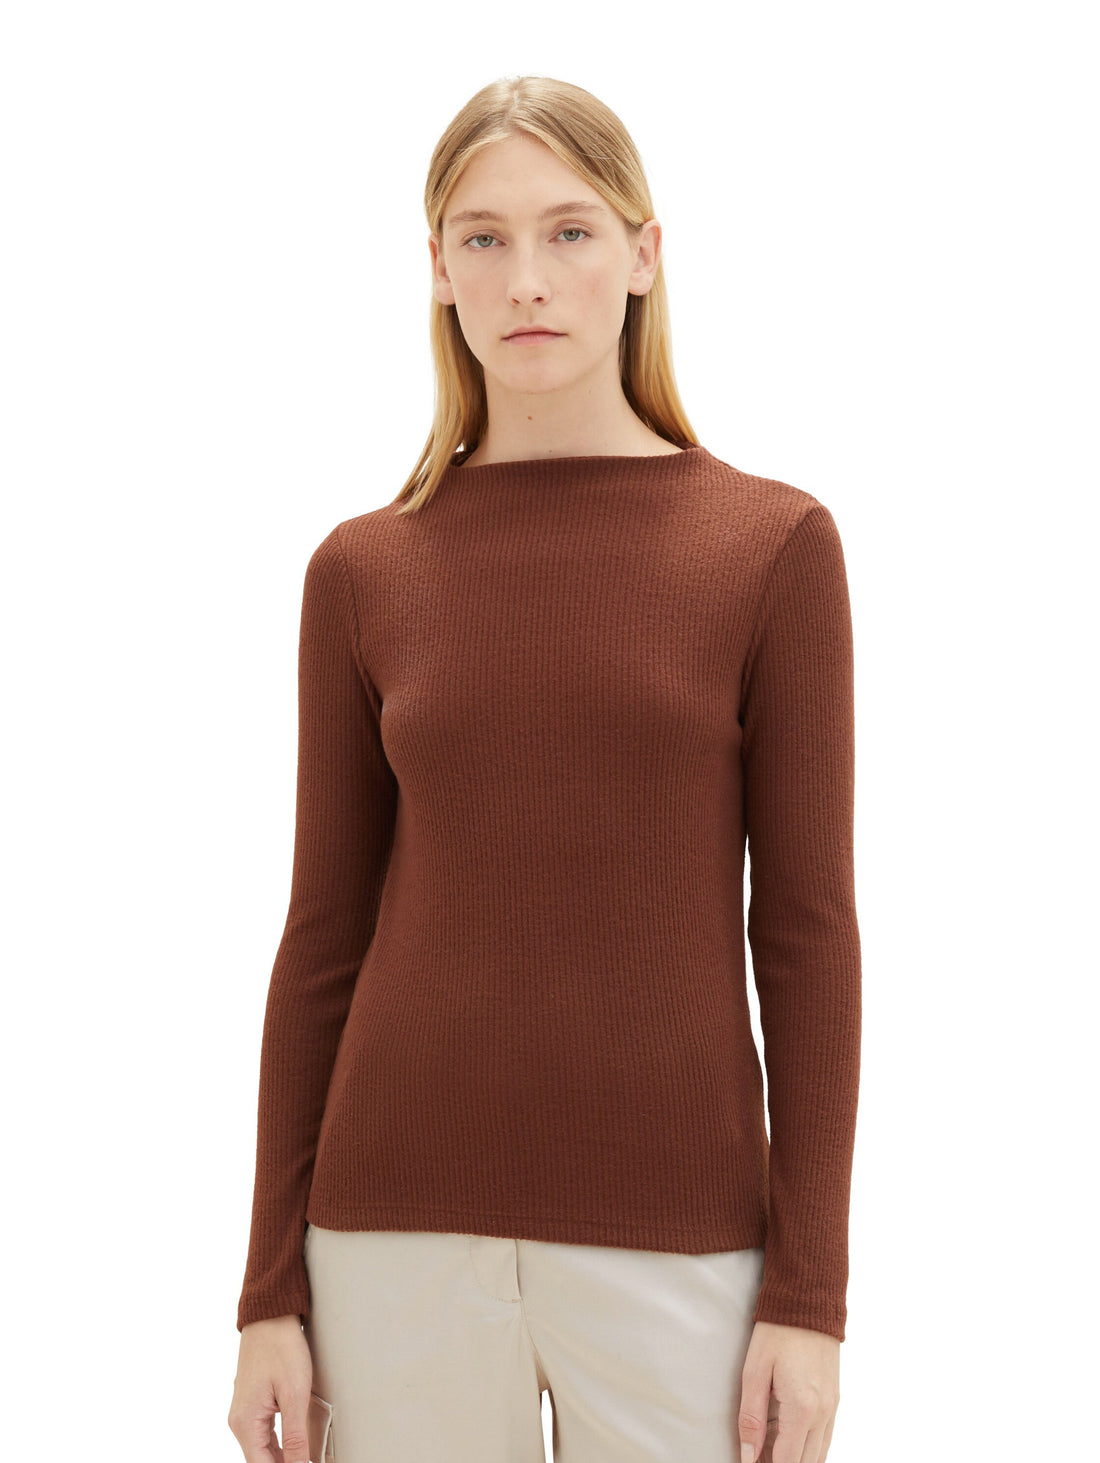 Long Sleeve T Shirt With Round Neckline_1038165_30337_05